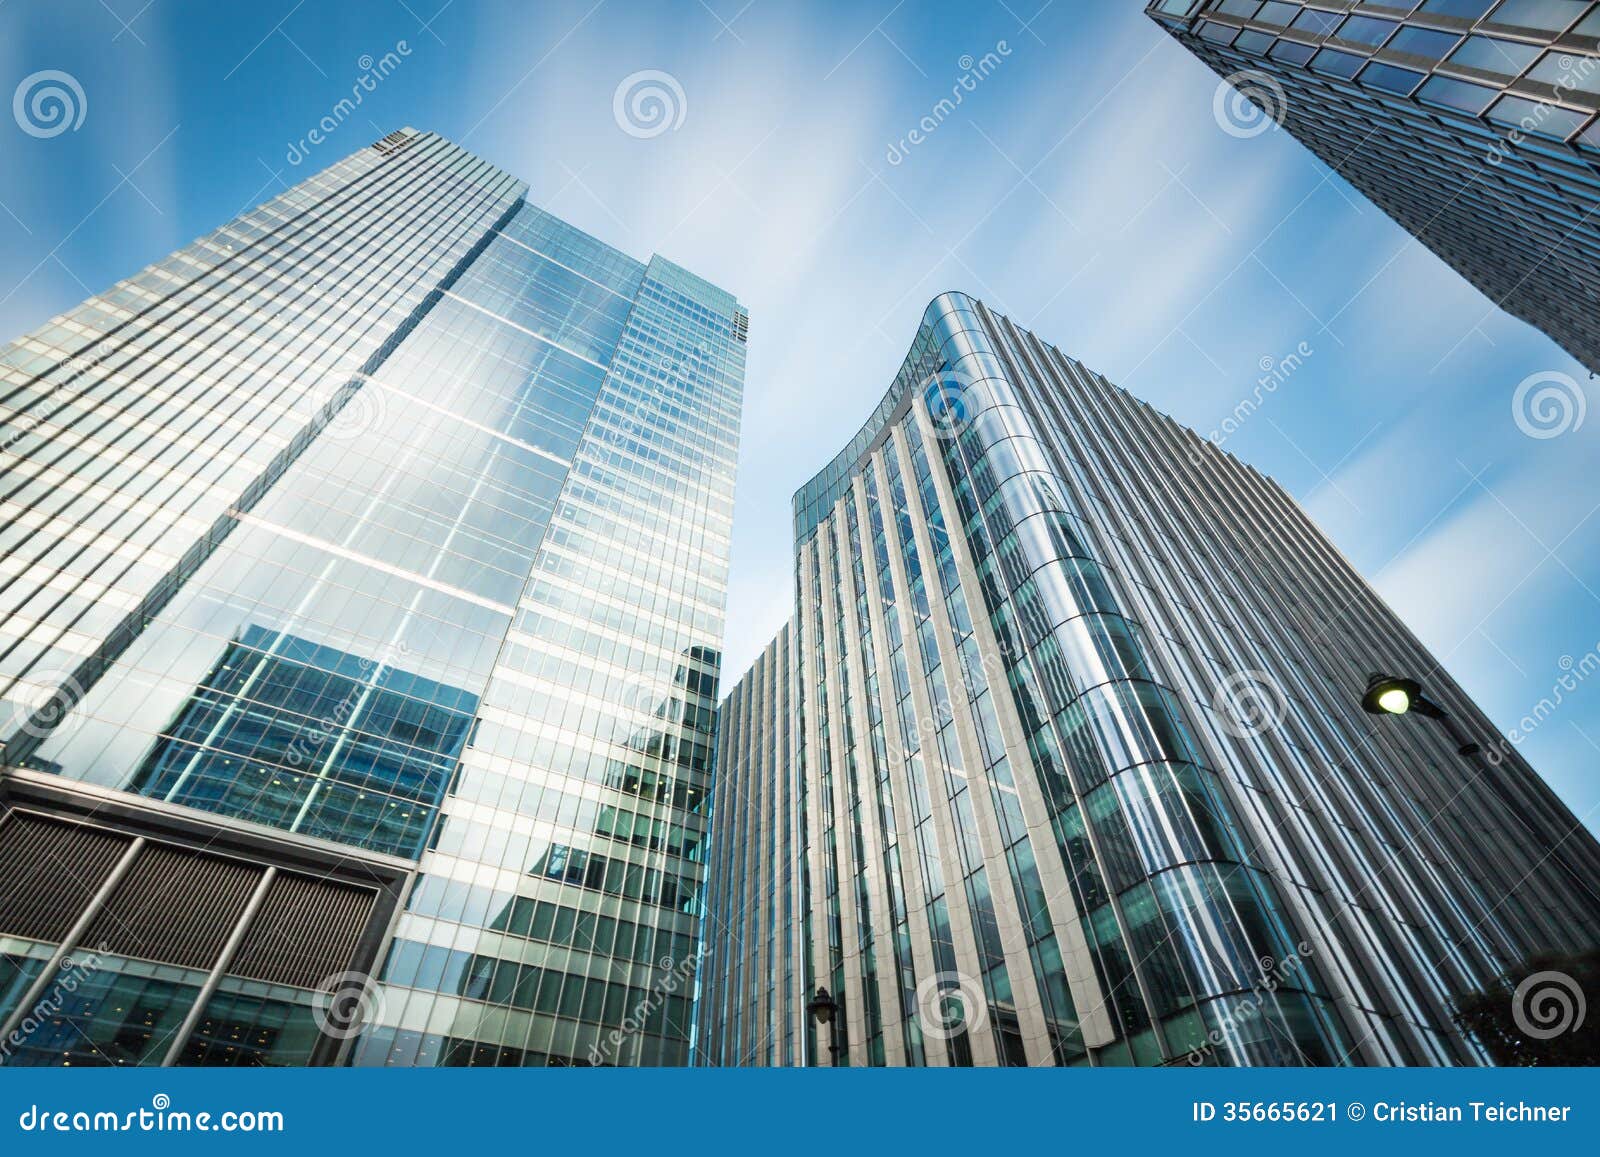 Business Building In Canary Wharf. Stock Image - Image: 35665621